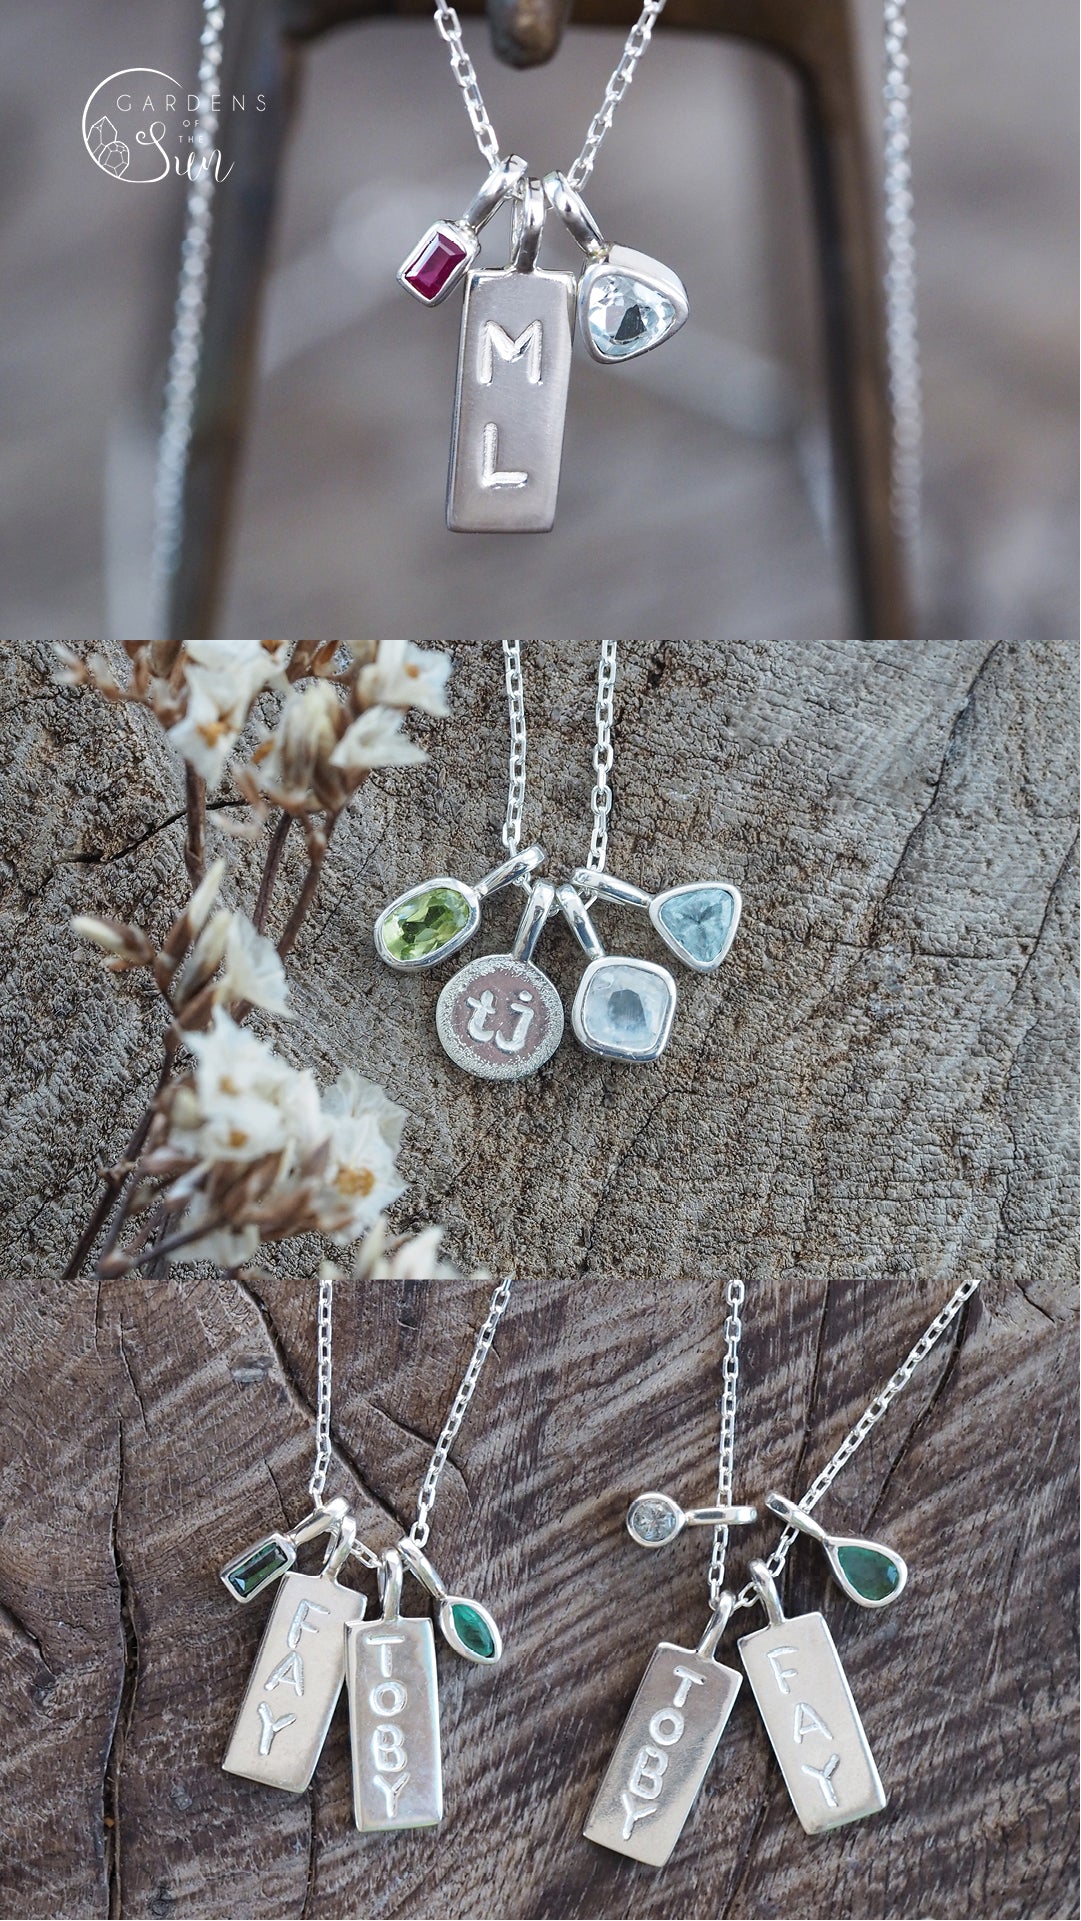 Personalized Engraved Birthstone Necklace 6 Names - 6 Stones 925 Sterling  Silver | eBay